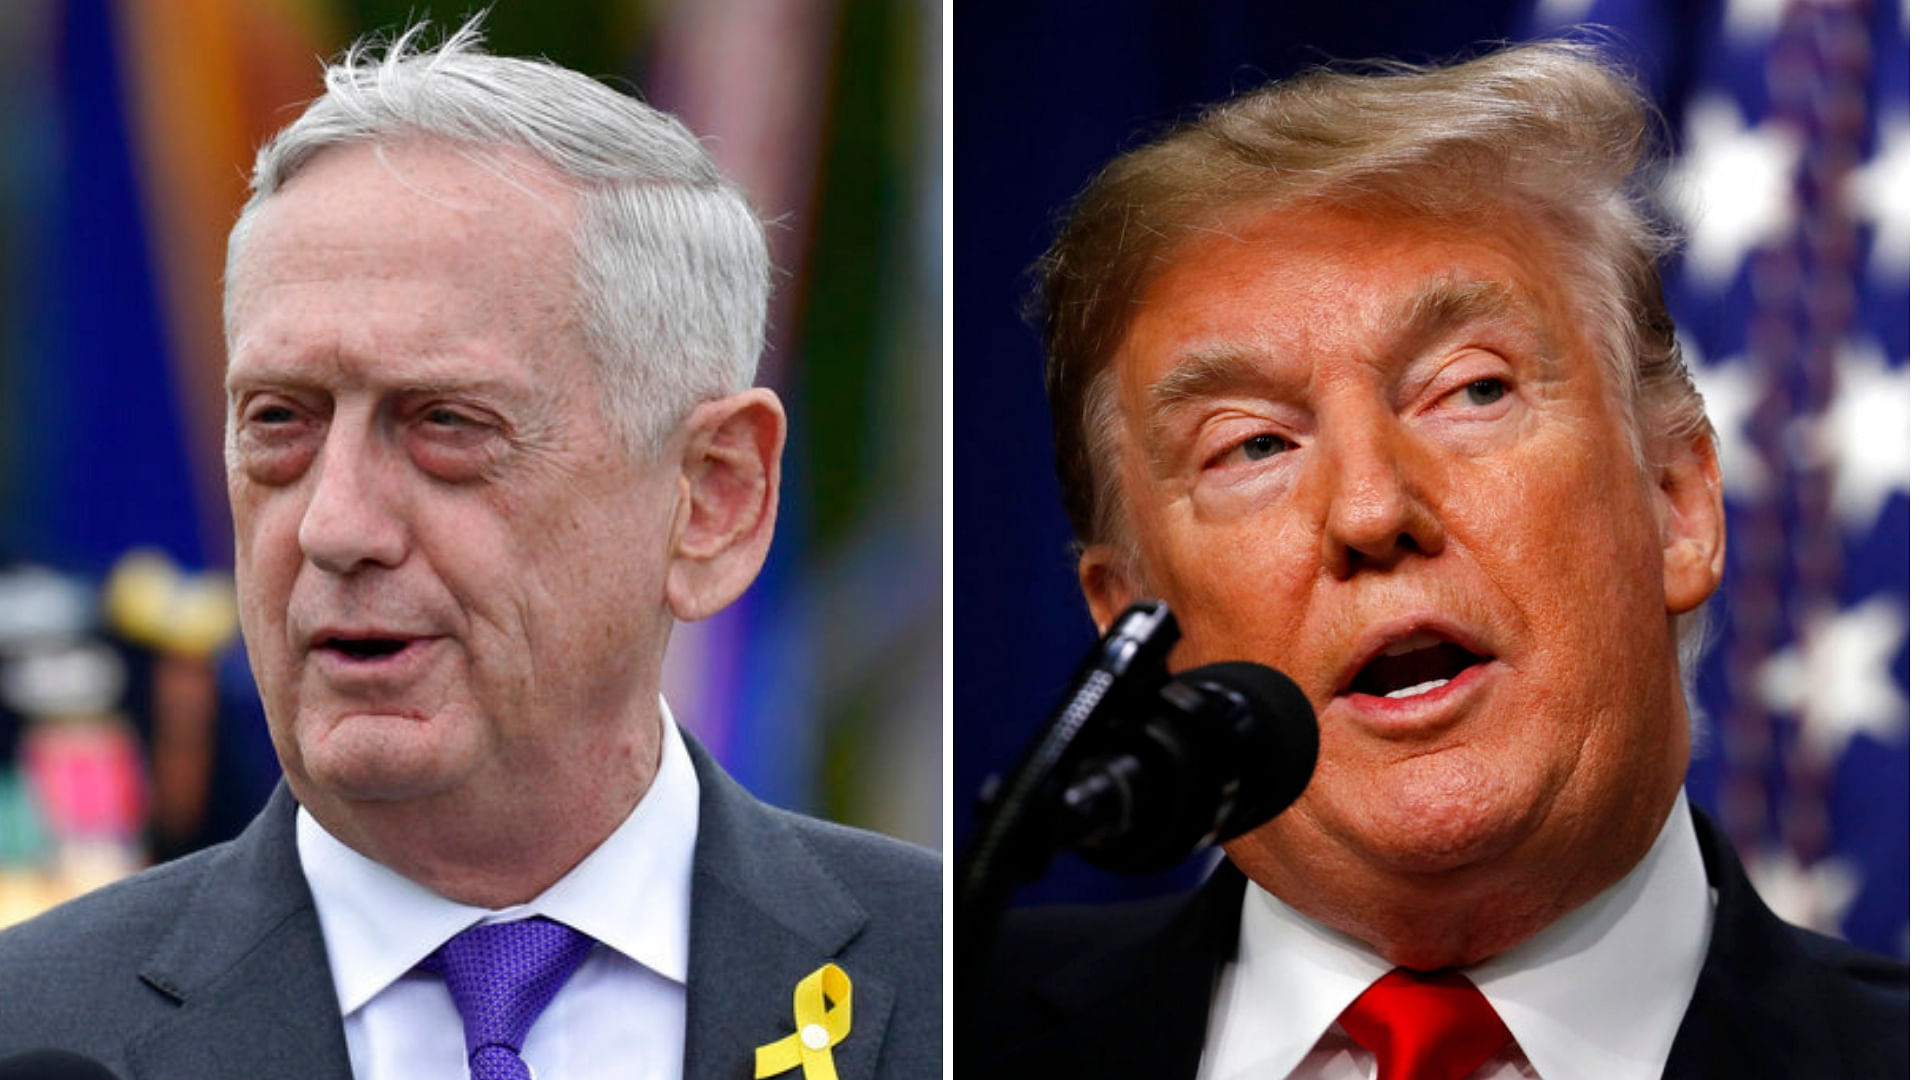 Defense Secretary Jim Mattis abruptly said he was resigning on Thursday, 20 December, after two years of disagreements with President Donald Trump.